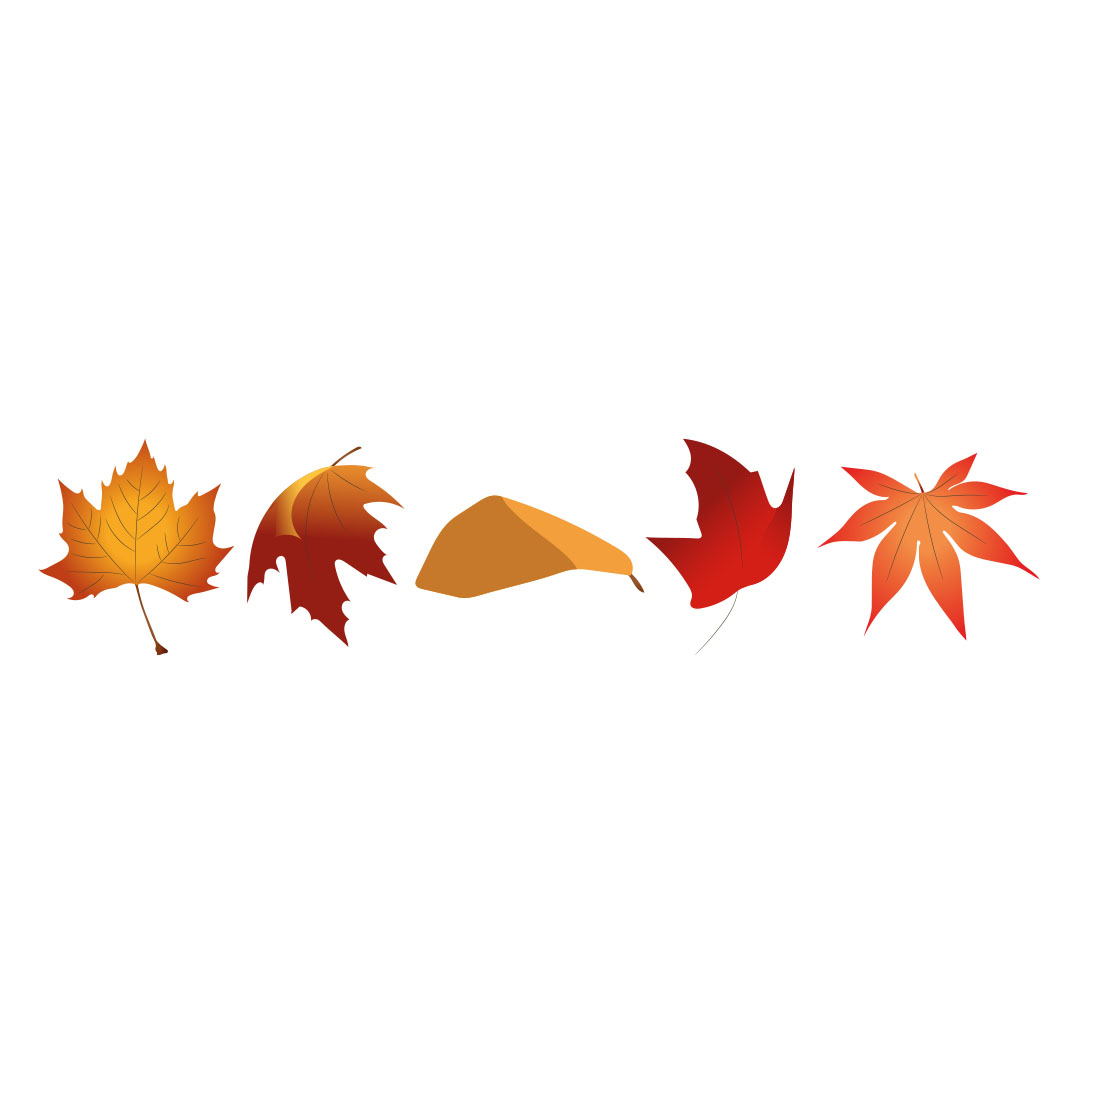 Group of four autumn leaves floating in the air.